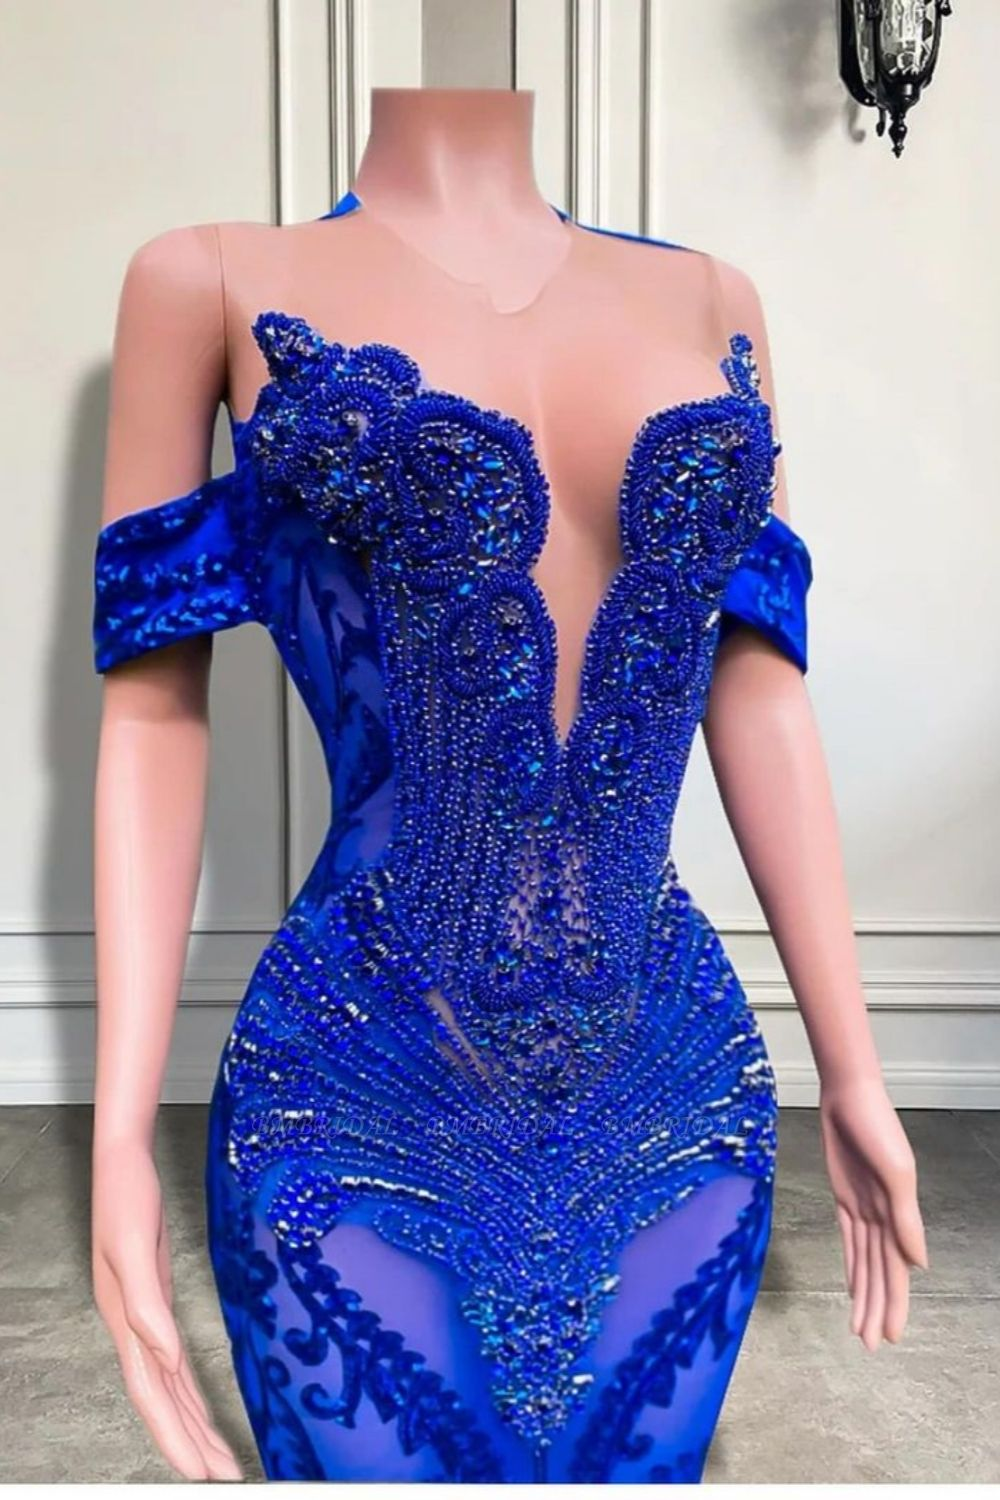 Luxury Royal Blue Ruched Flowers Prom Dresses For Black Girls Off The Shoulder Mermaid Evening Gowns Ruched Flowers  Y6642